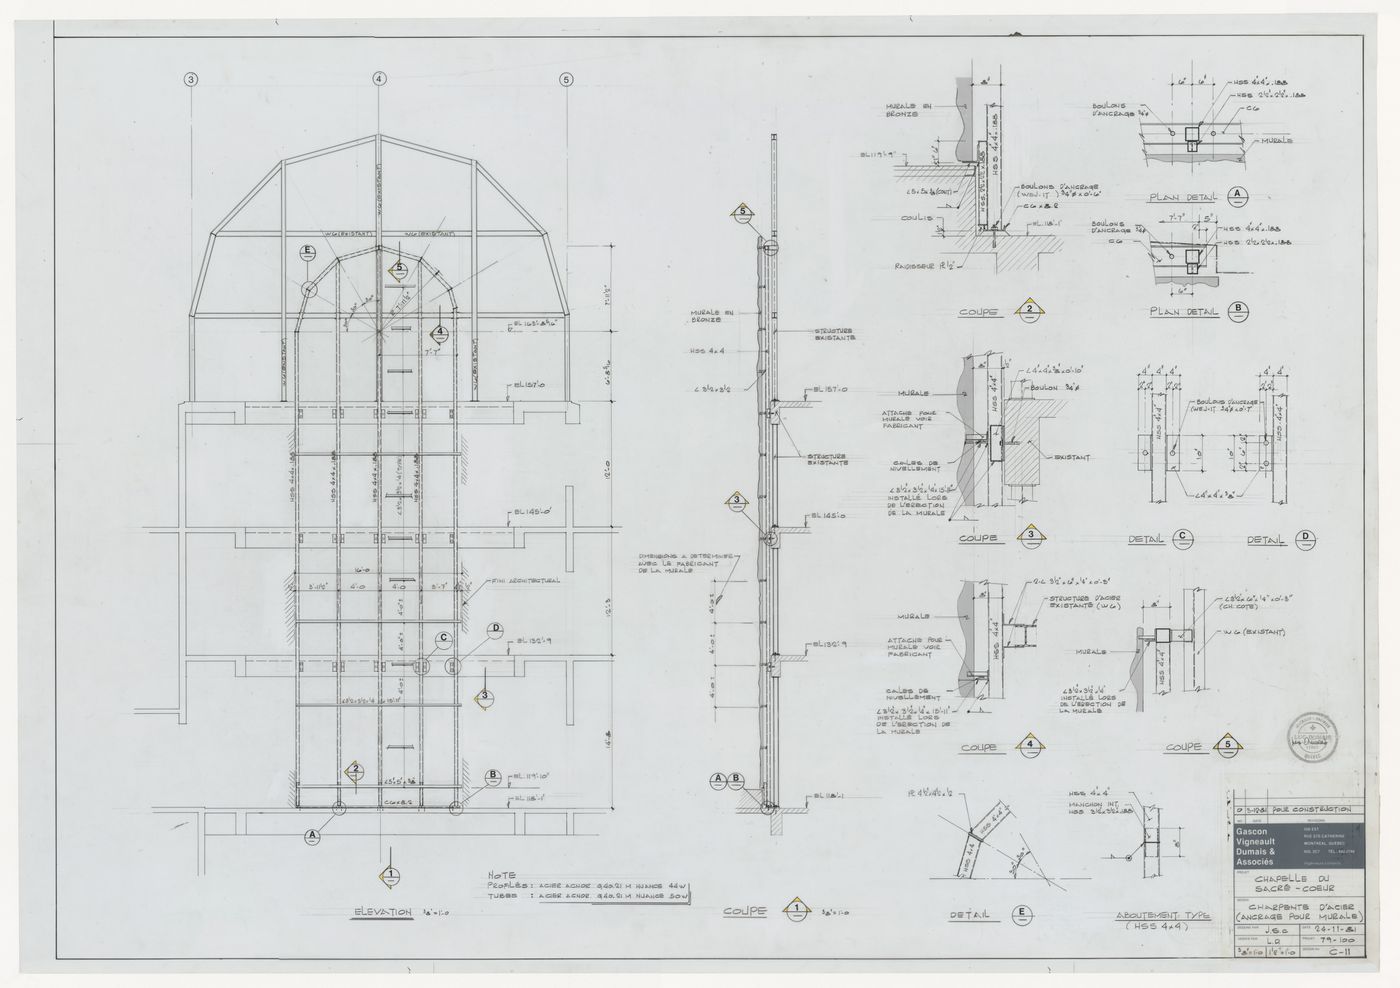 Elevation and sections for a wall and wall details for mural anchoring for the reconstruction of the Chapelle du Sacré-Coeur, Notre-Dame